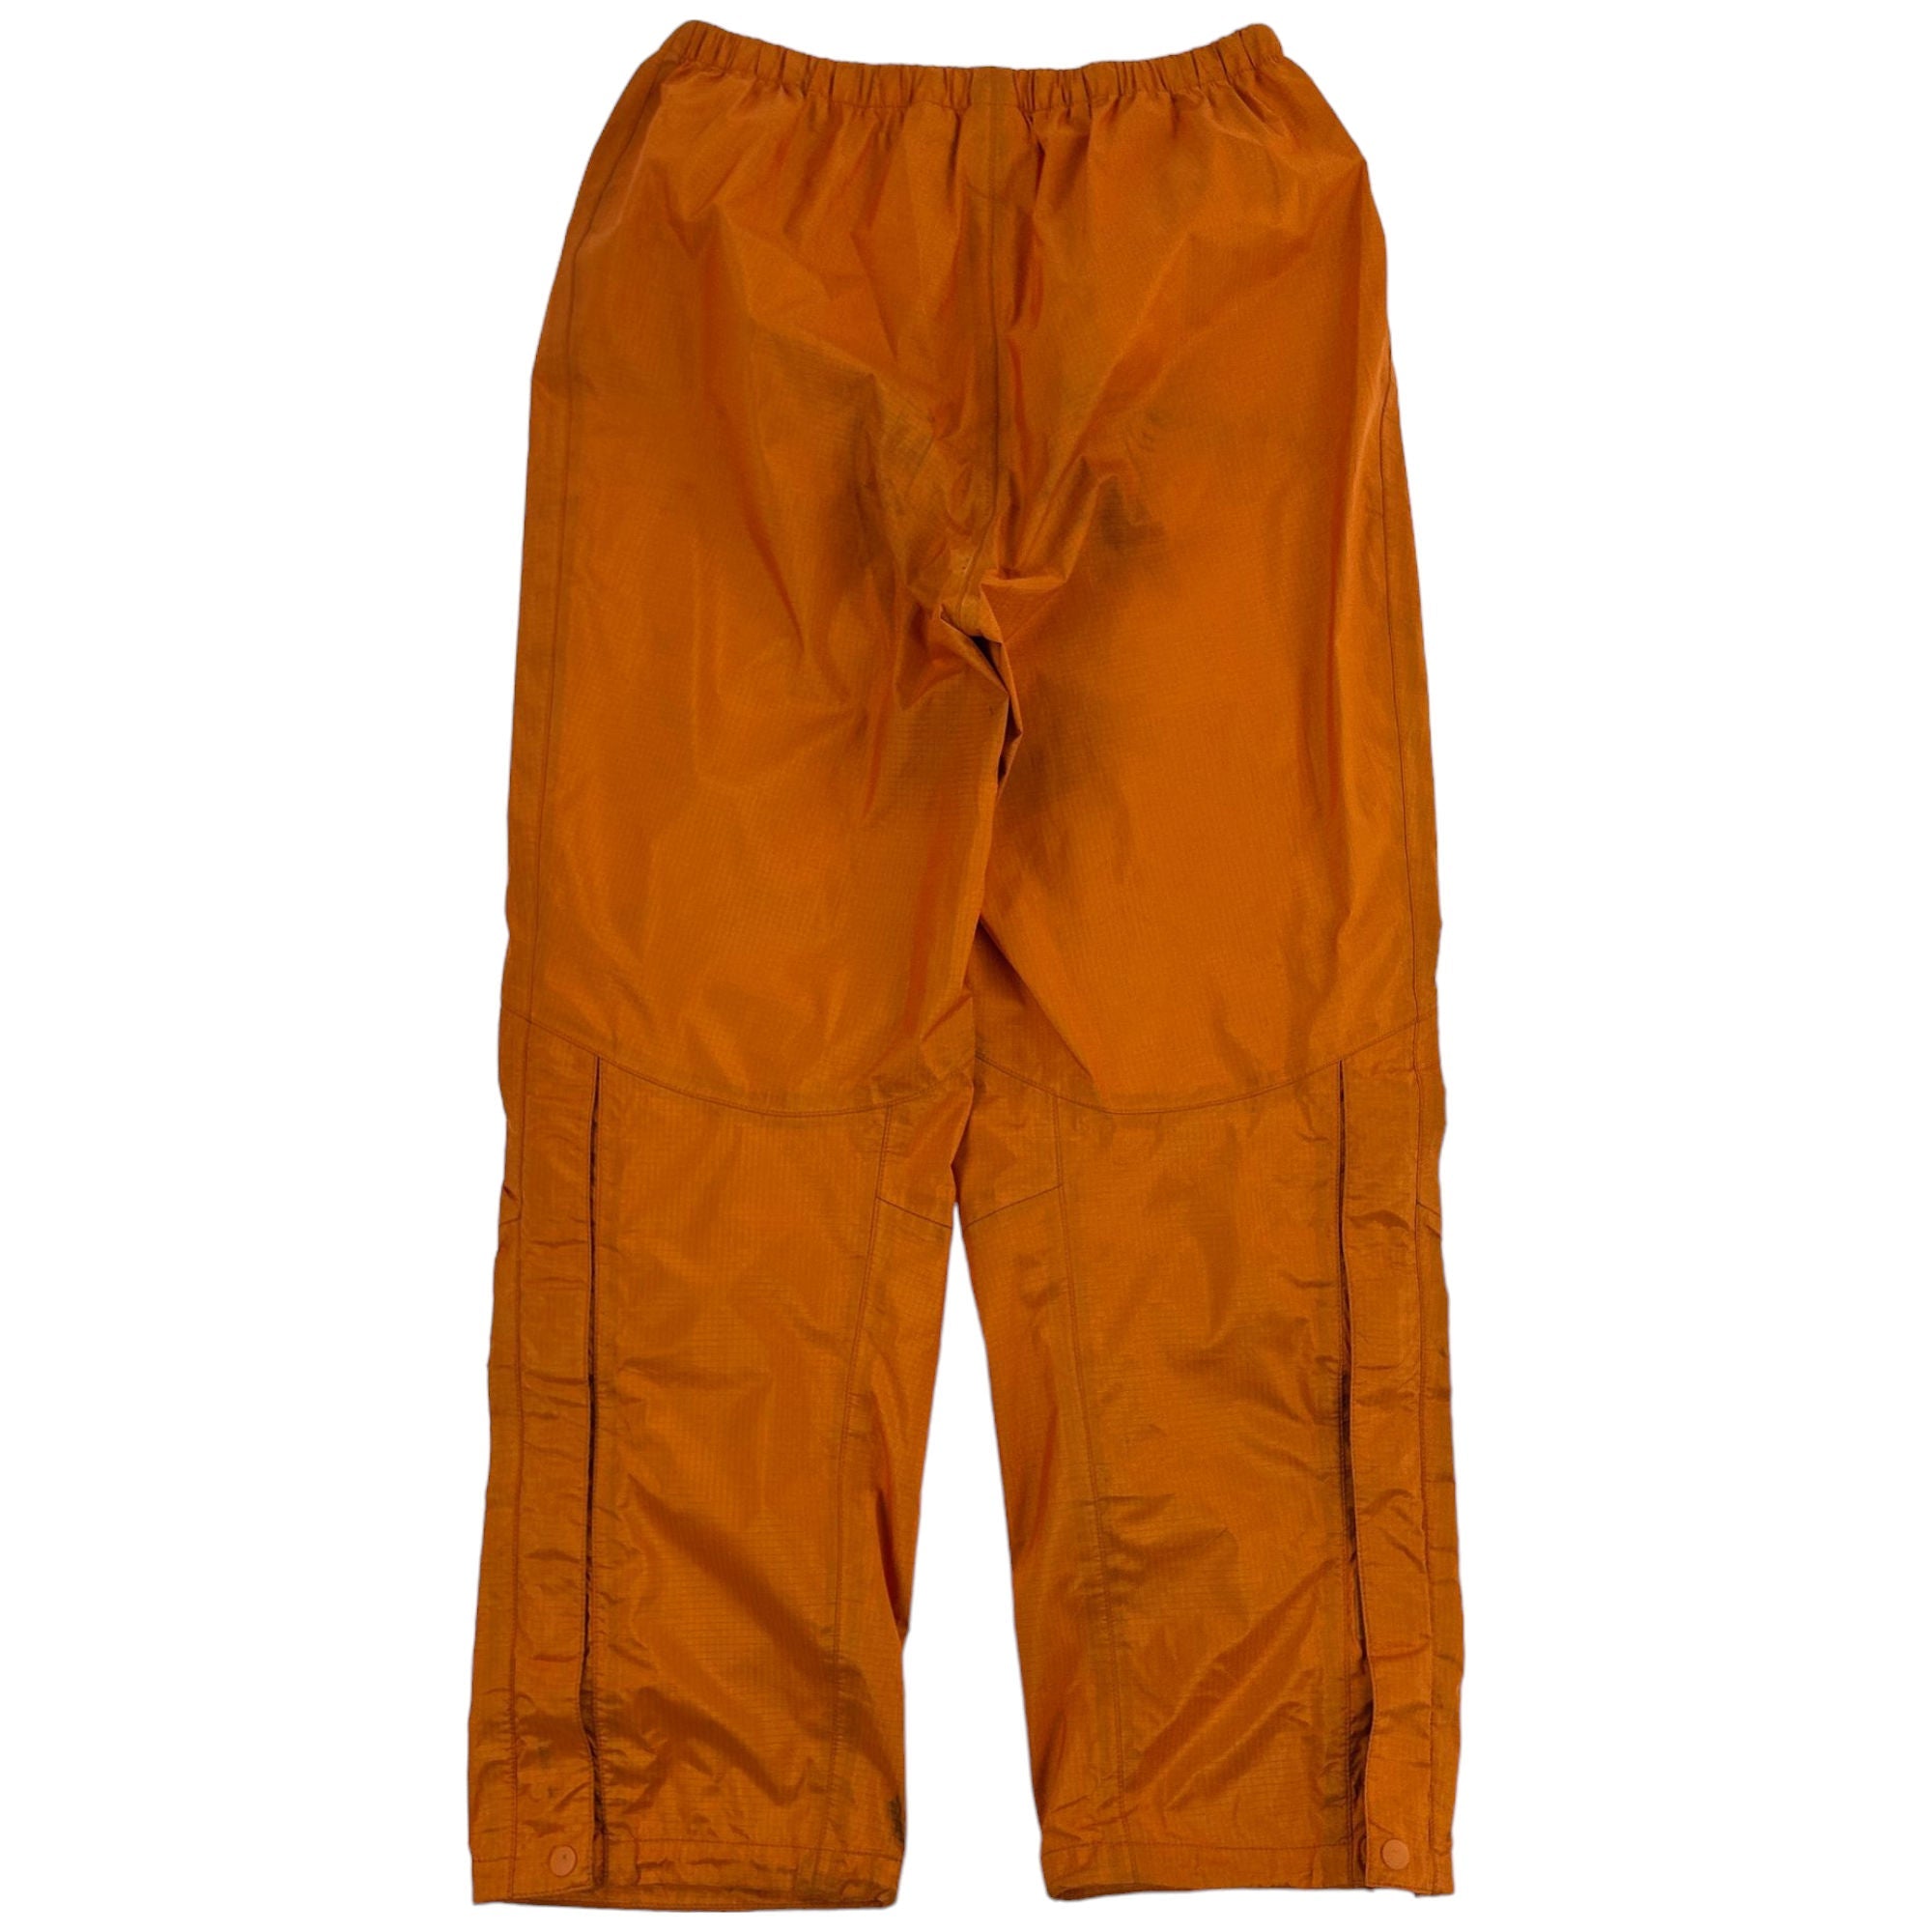 Montbell Light Down Pants - M - Sold - Backpacking Light